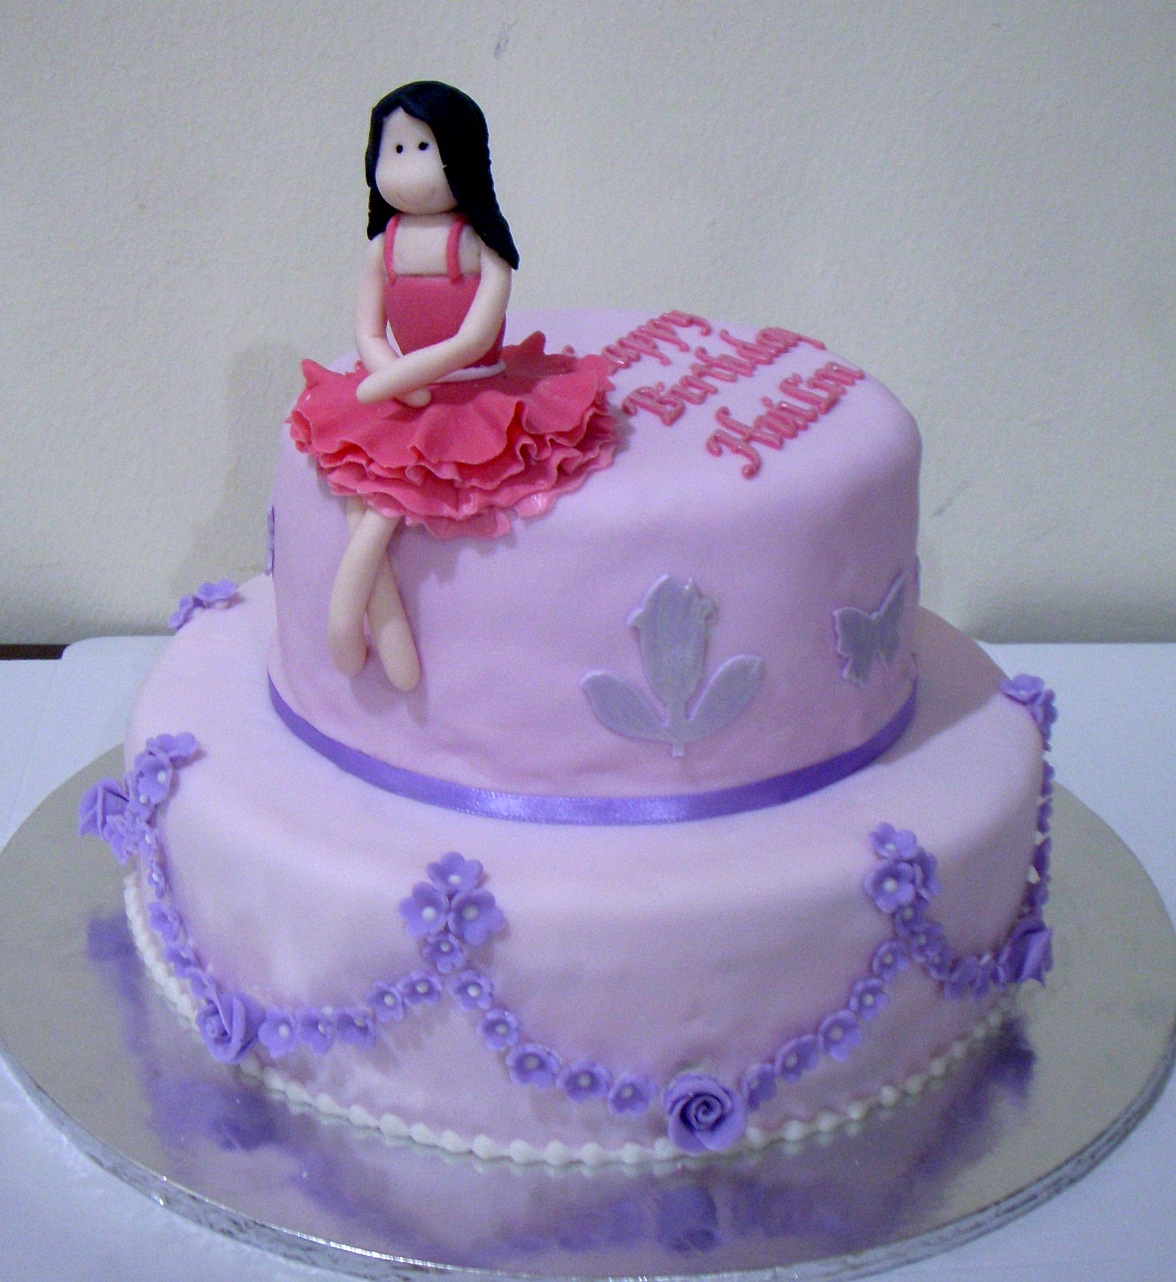 chocolate birthday cake with strawberries cake is for a girl who adores purple the replica birthday girl cake 